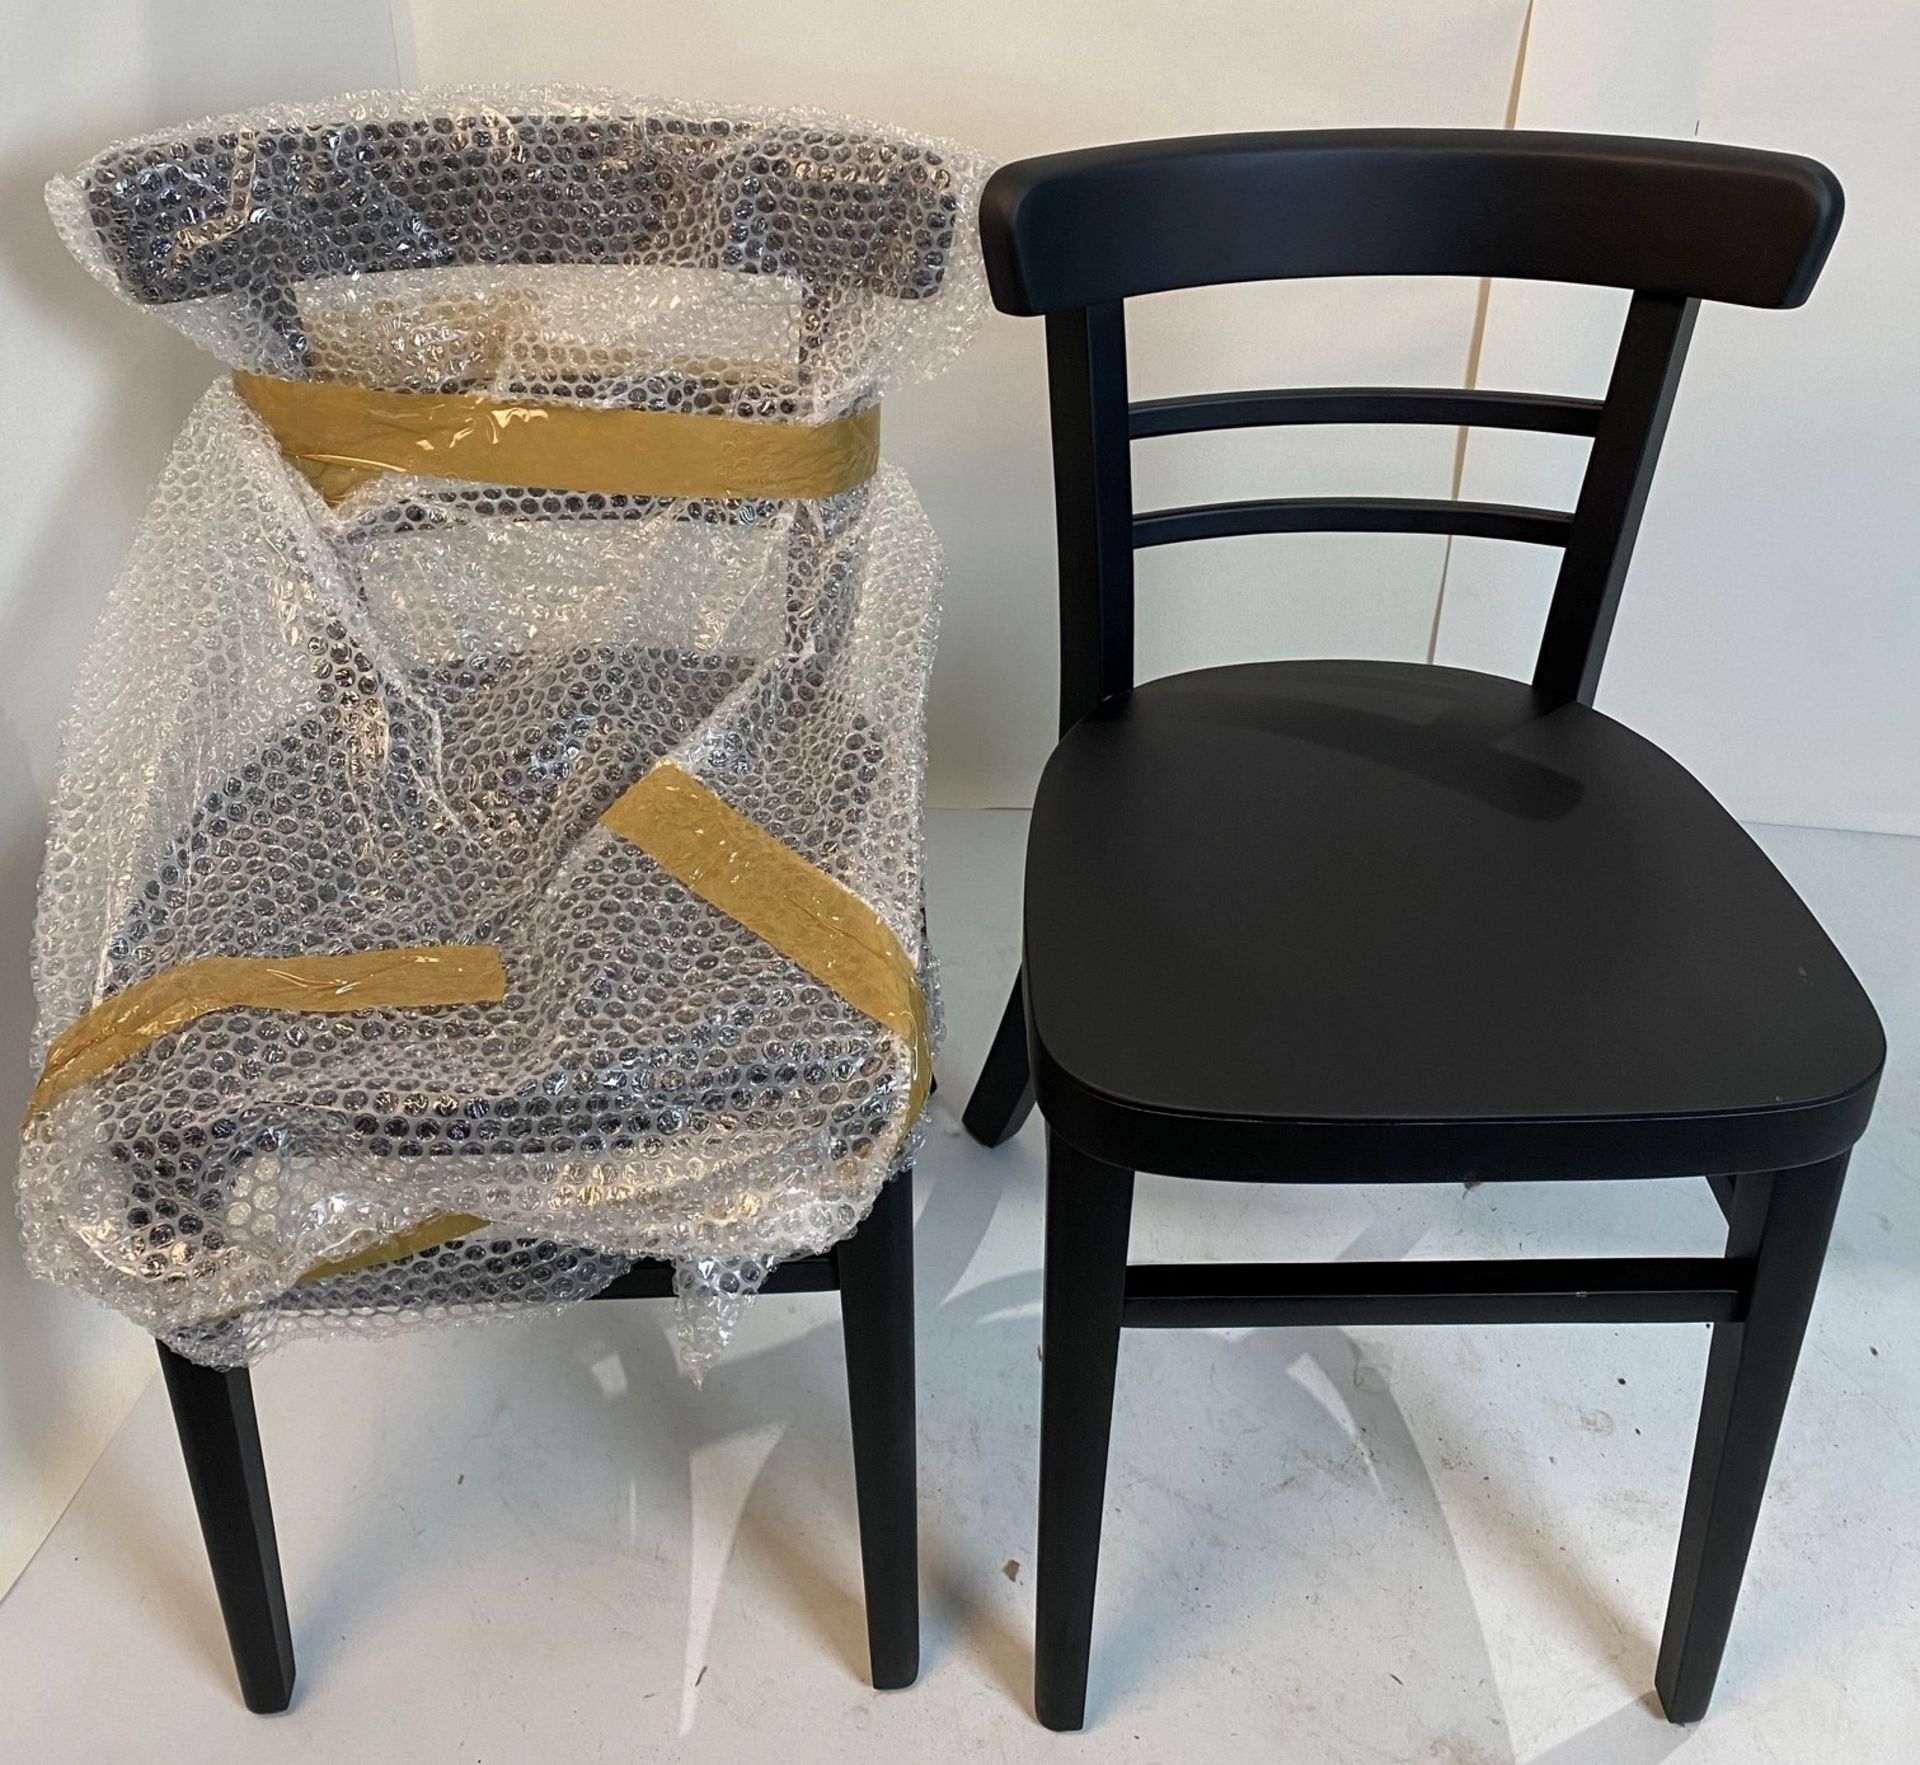 2 x Expresso Black Stain chairs with plastic gliders